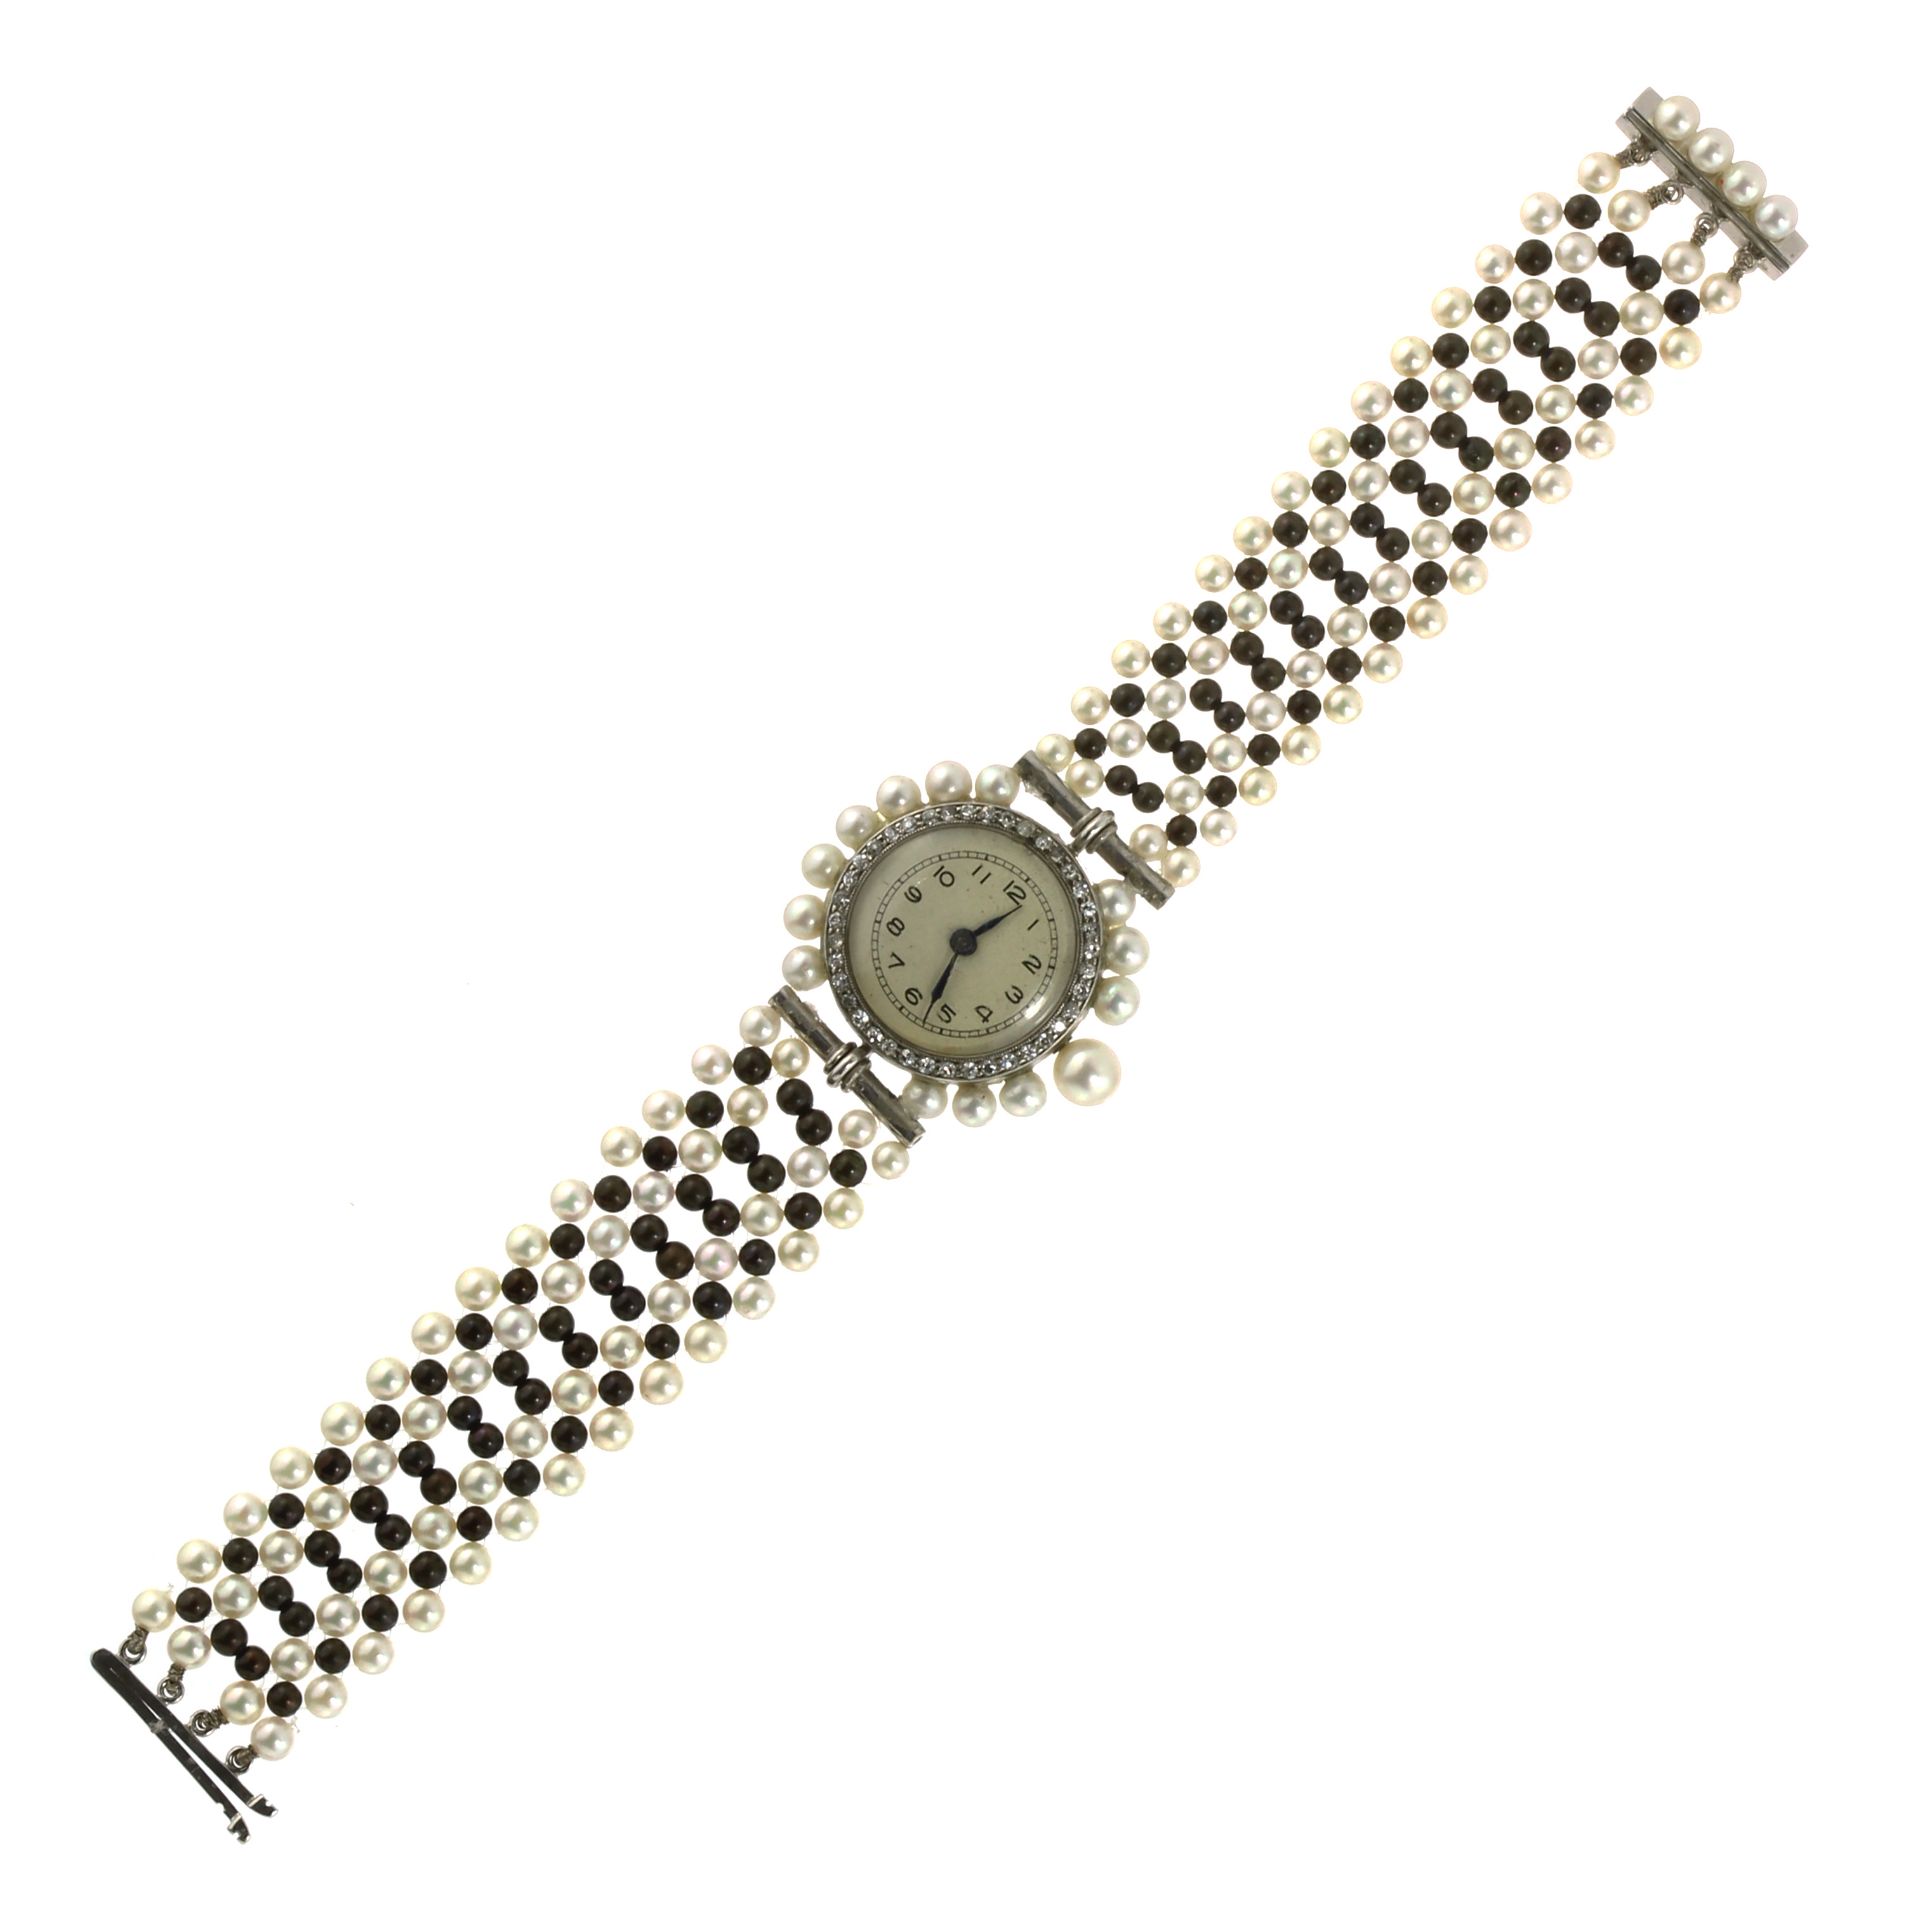 A PEARL AND DIAMOND COCKTAIL WATCH, CIRCA 1935 the circular dial jewelled around the edge with round